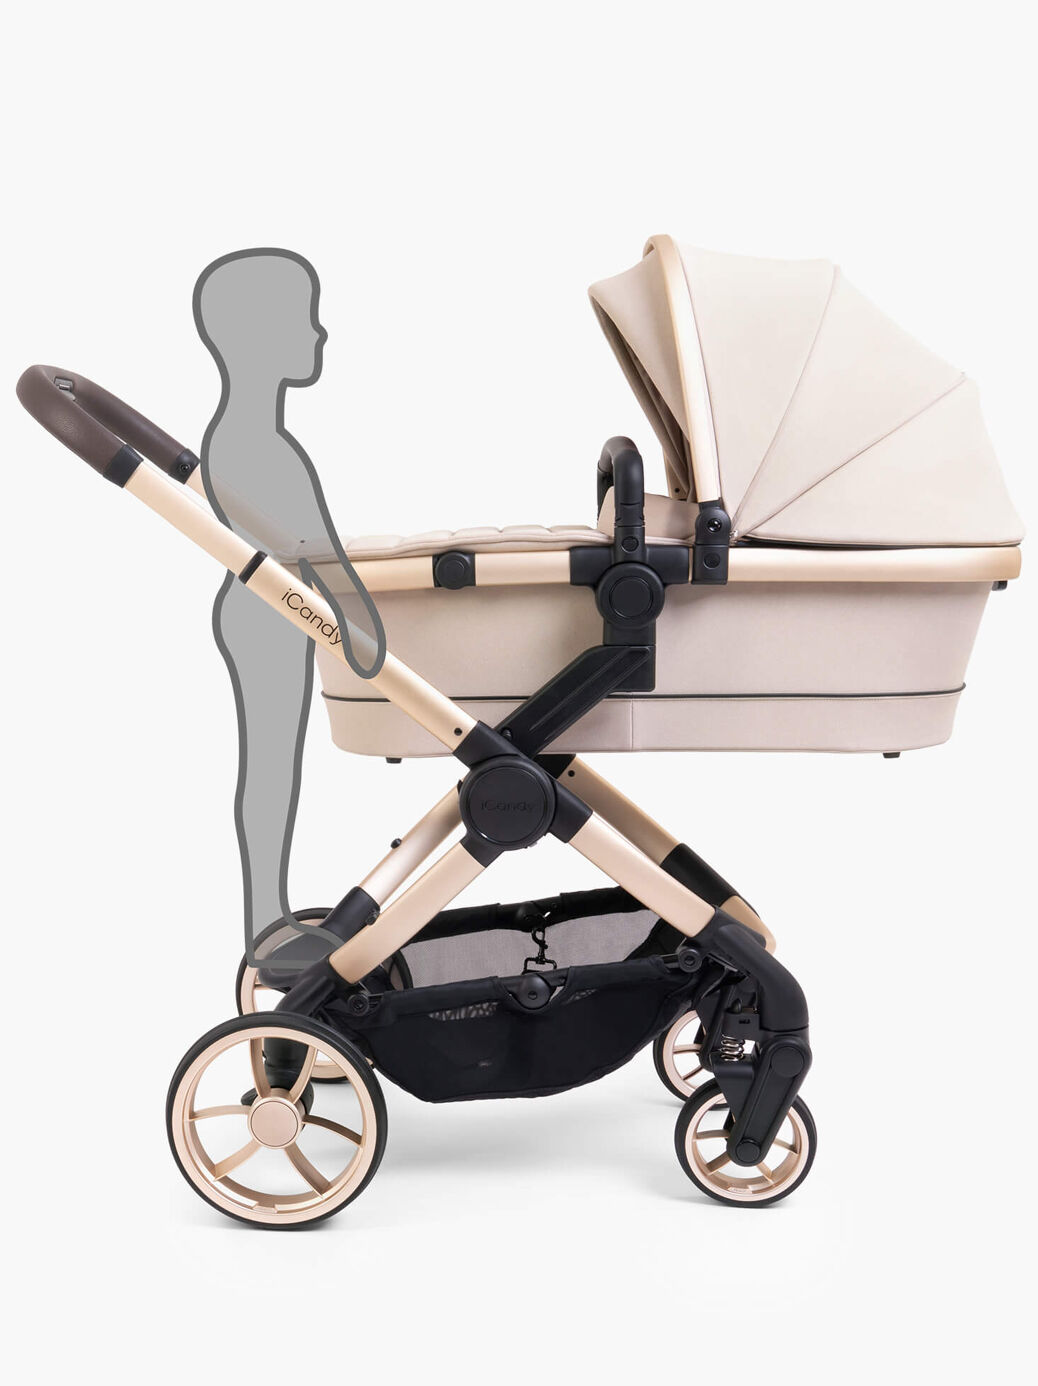 Peach 7 Pushchair and Carrycot in Biscotti - iCandy